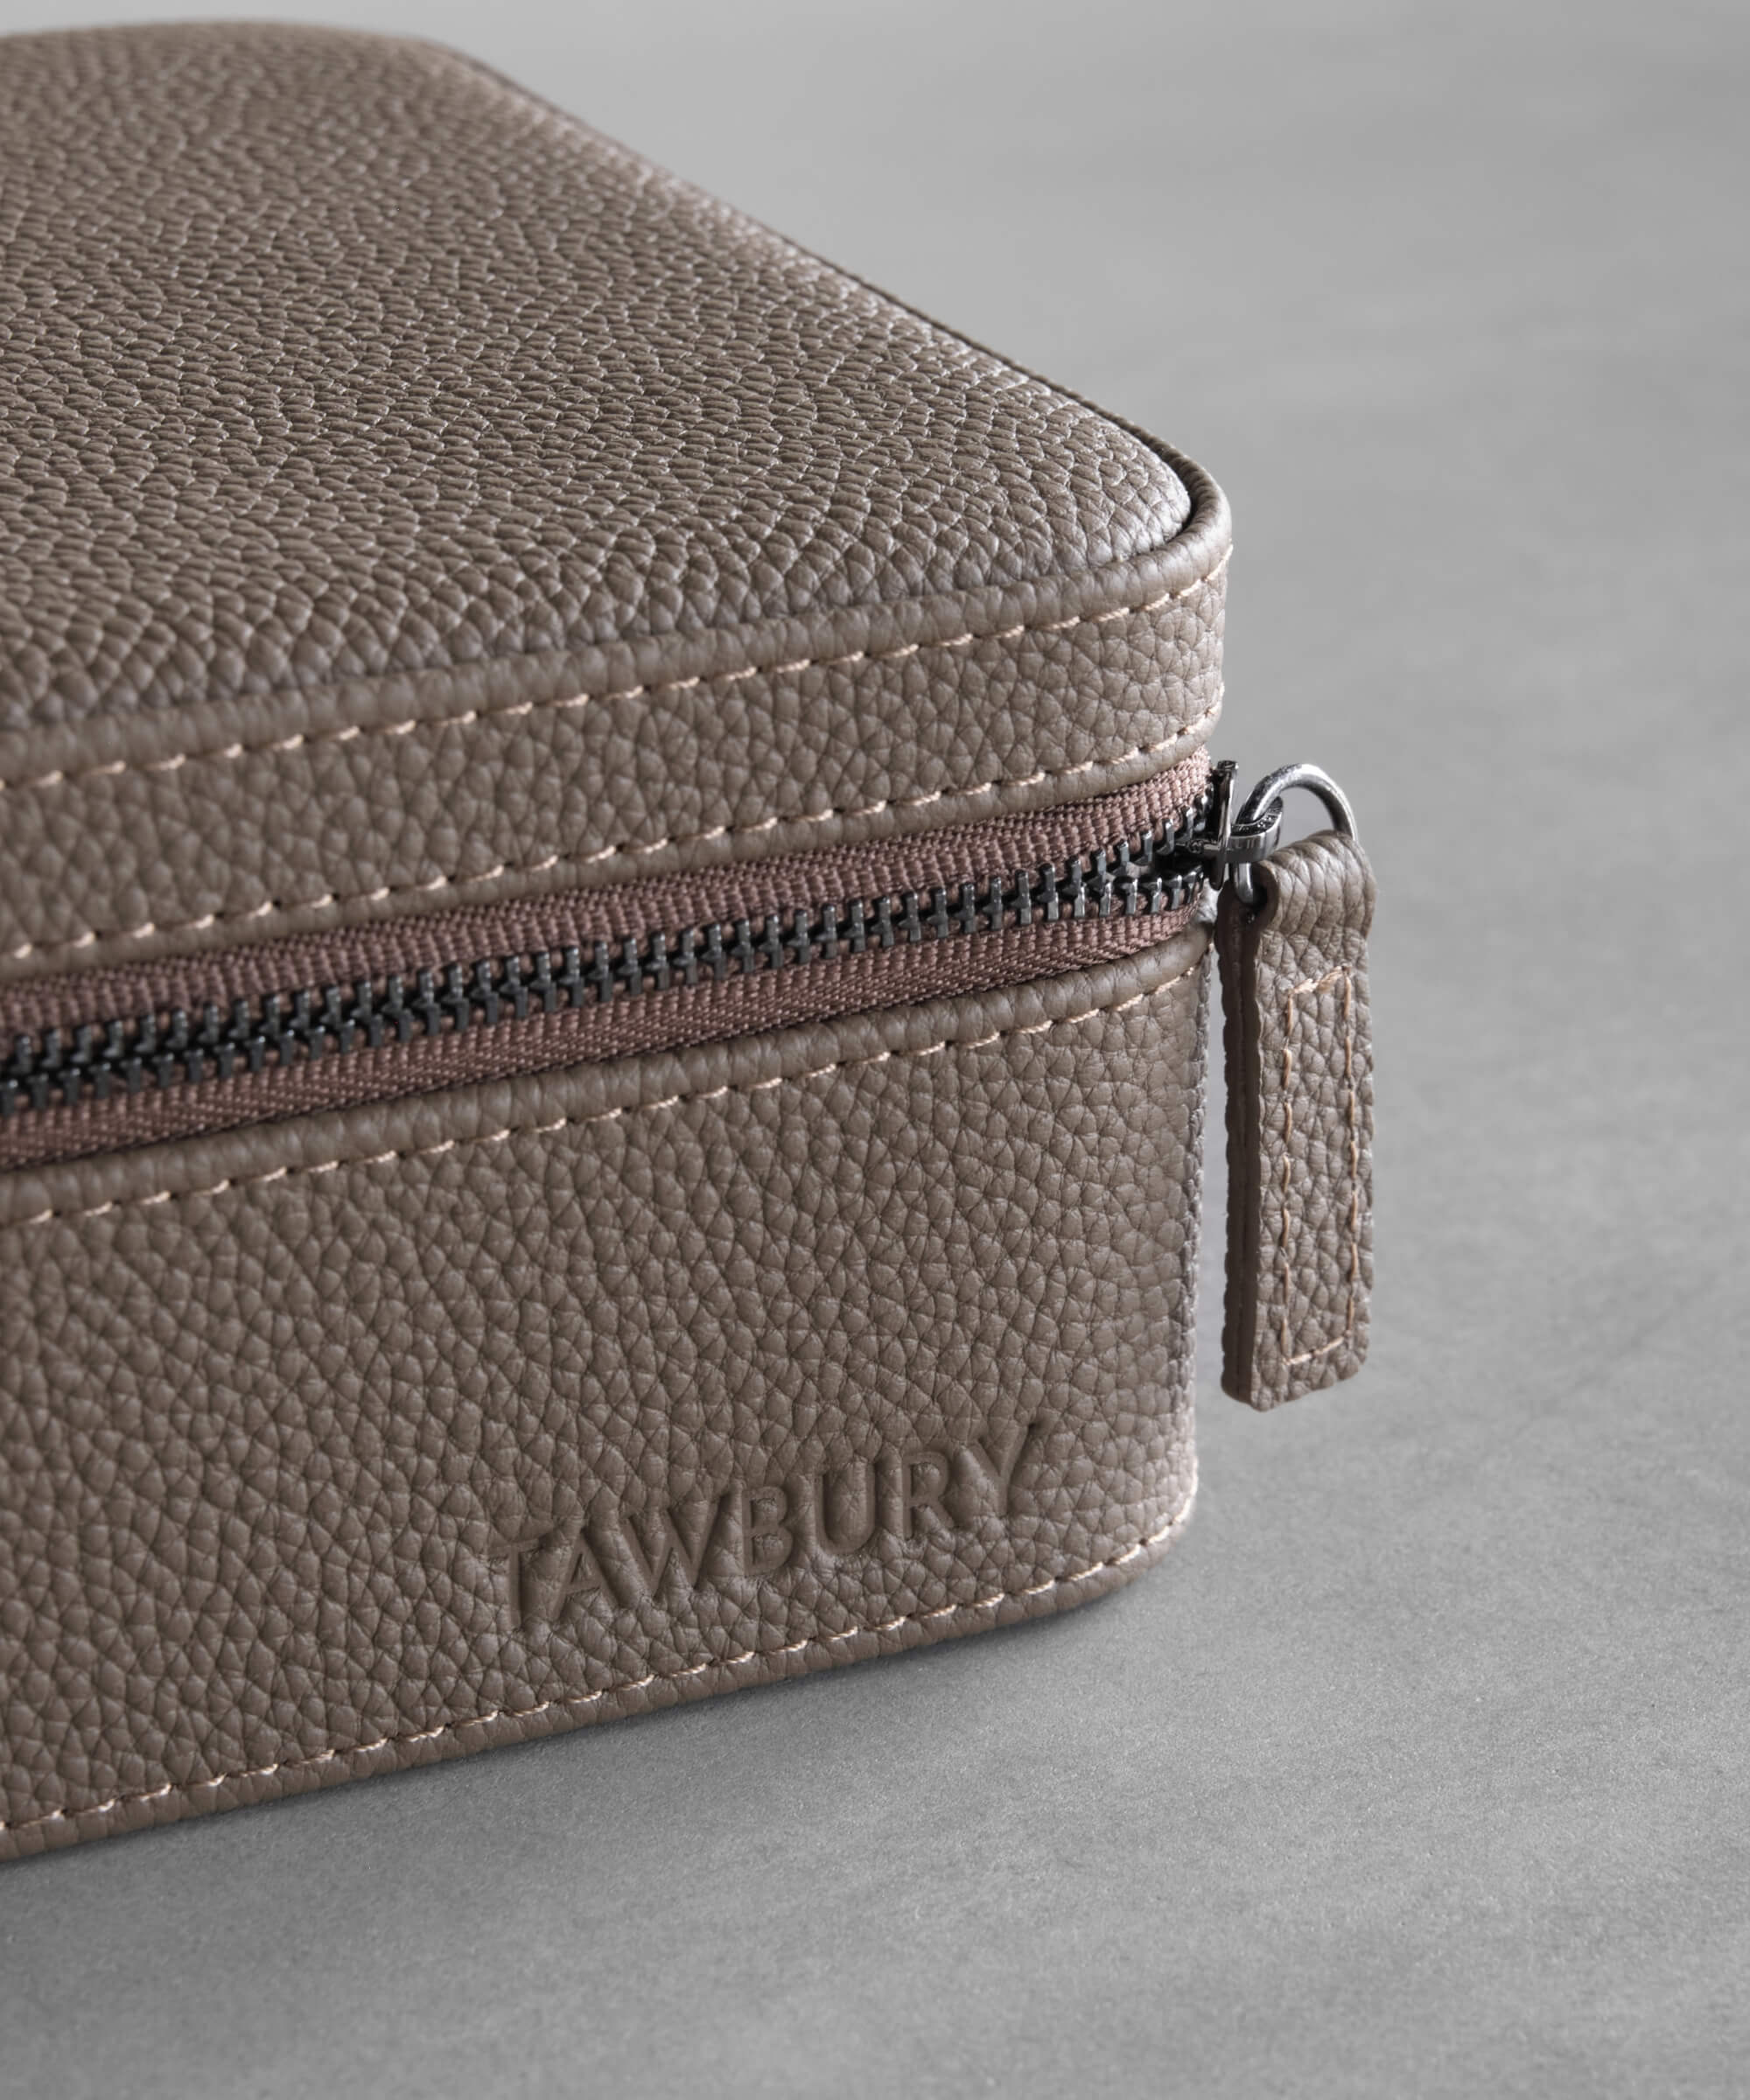 A TAWBURY Fraser 2 Watch Travel Case with Storage - Taupe leather travel case with a zipper for watch protection and functionality.